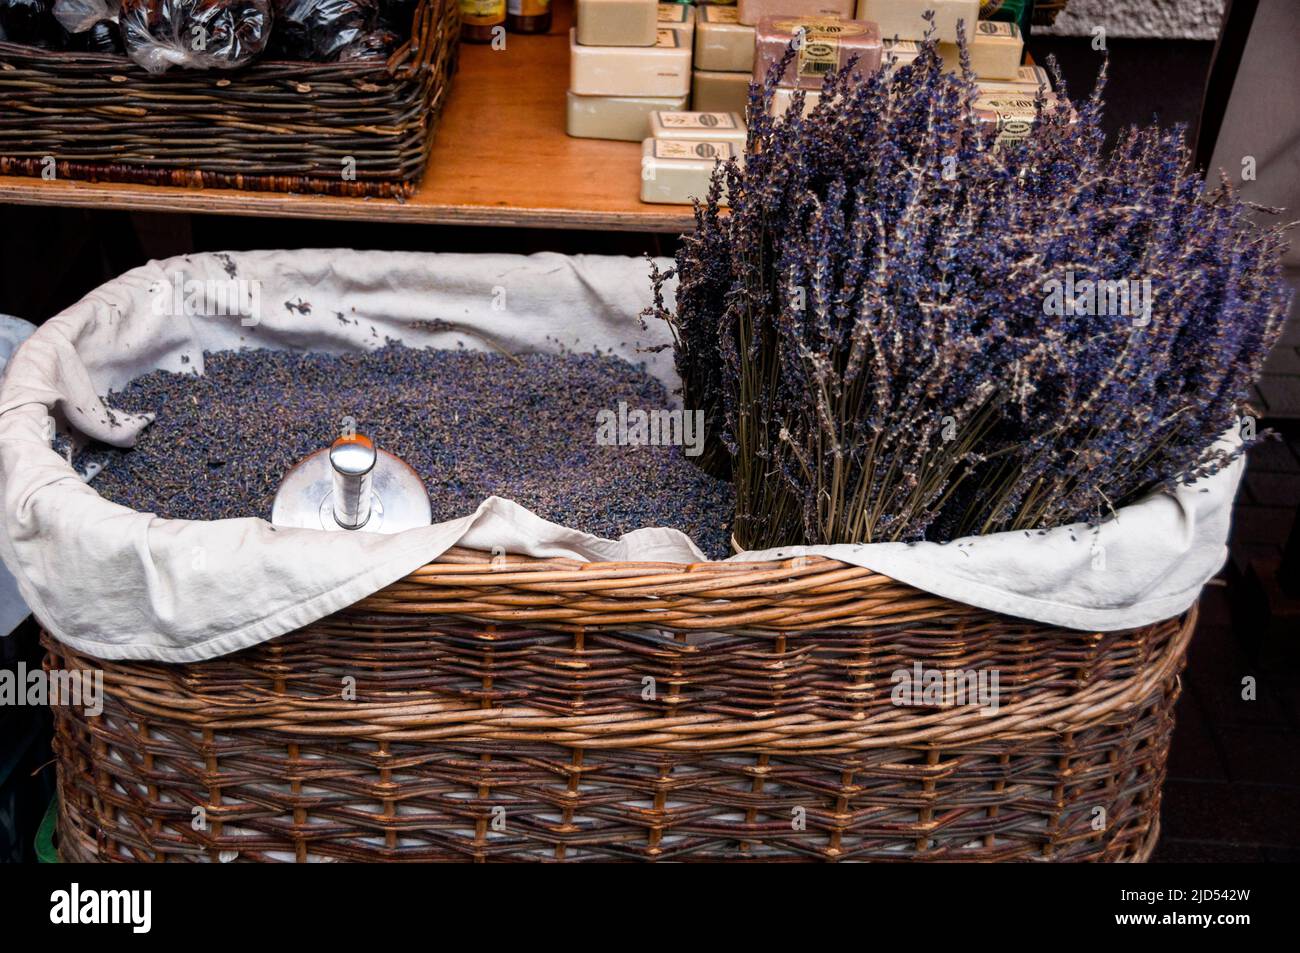 Lavendar at the Saturday farm market in the port town of Galway, Ireland. Stock Photo